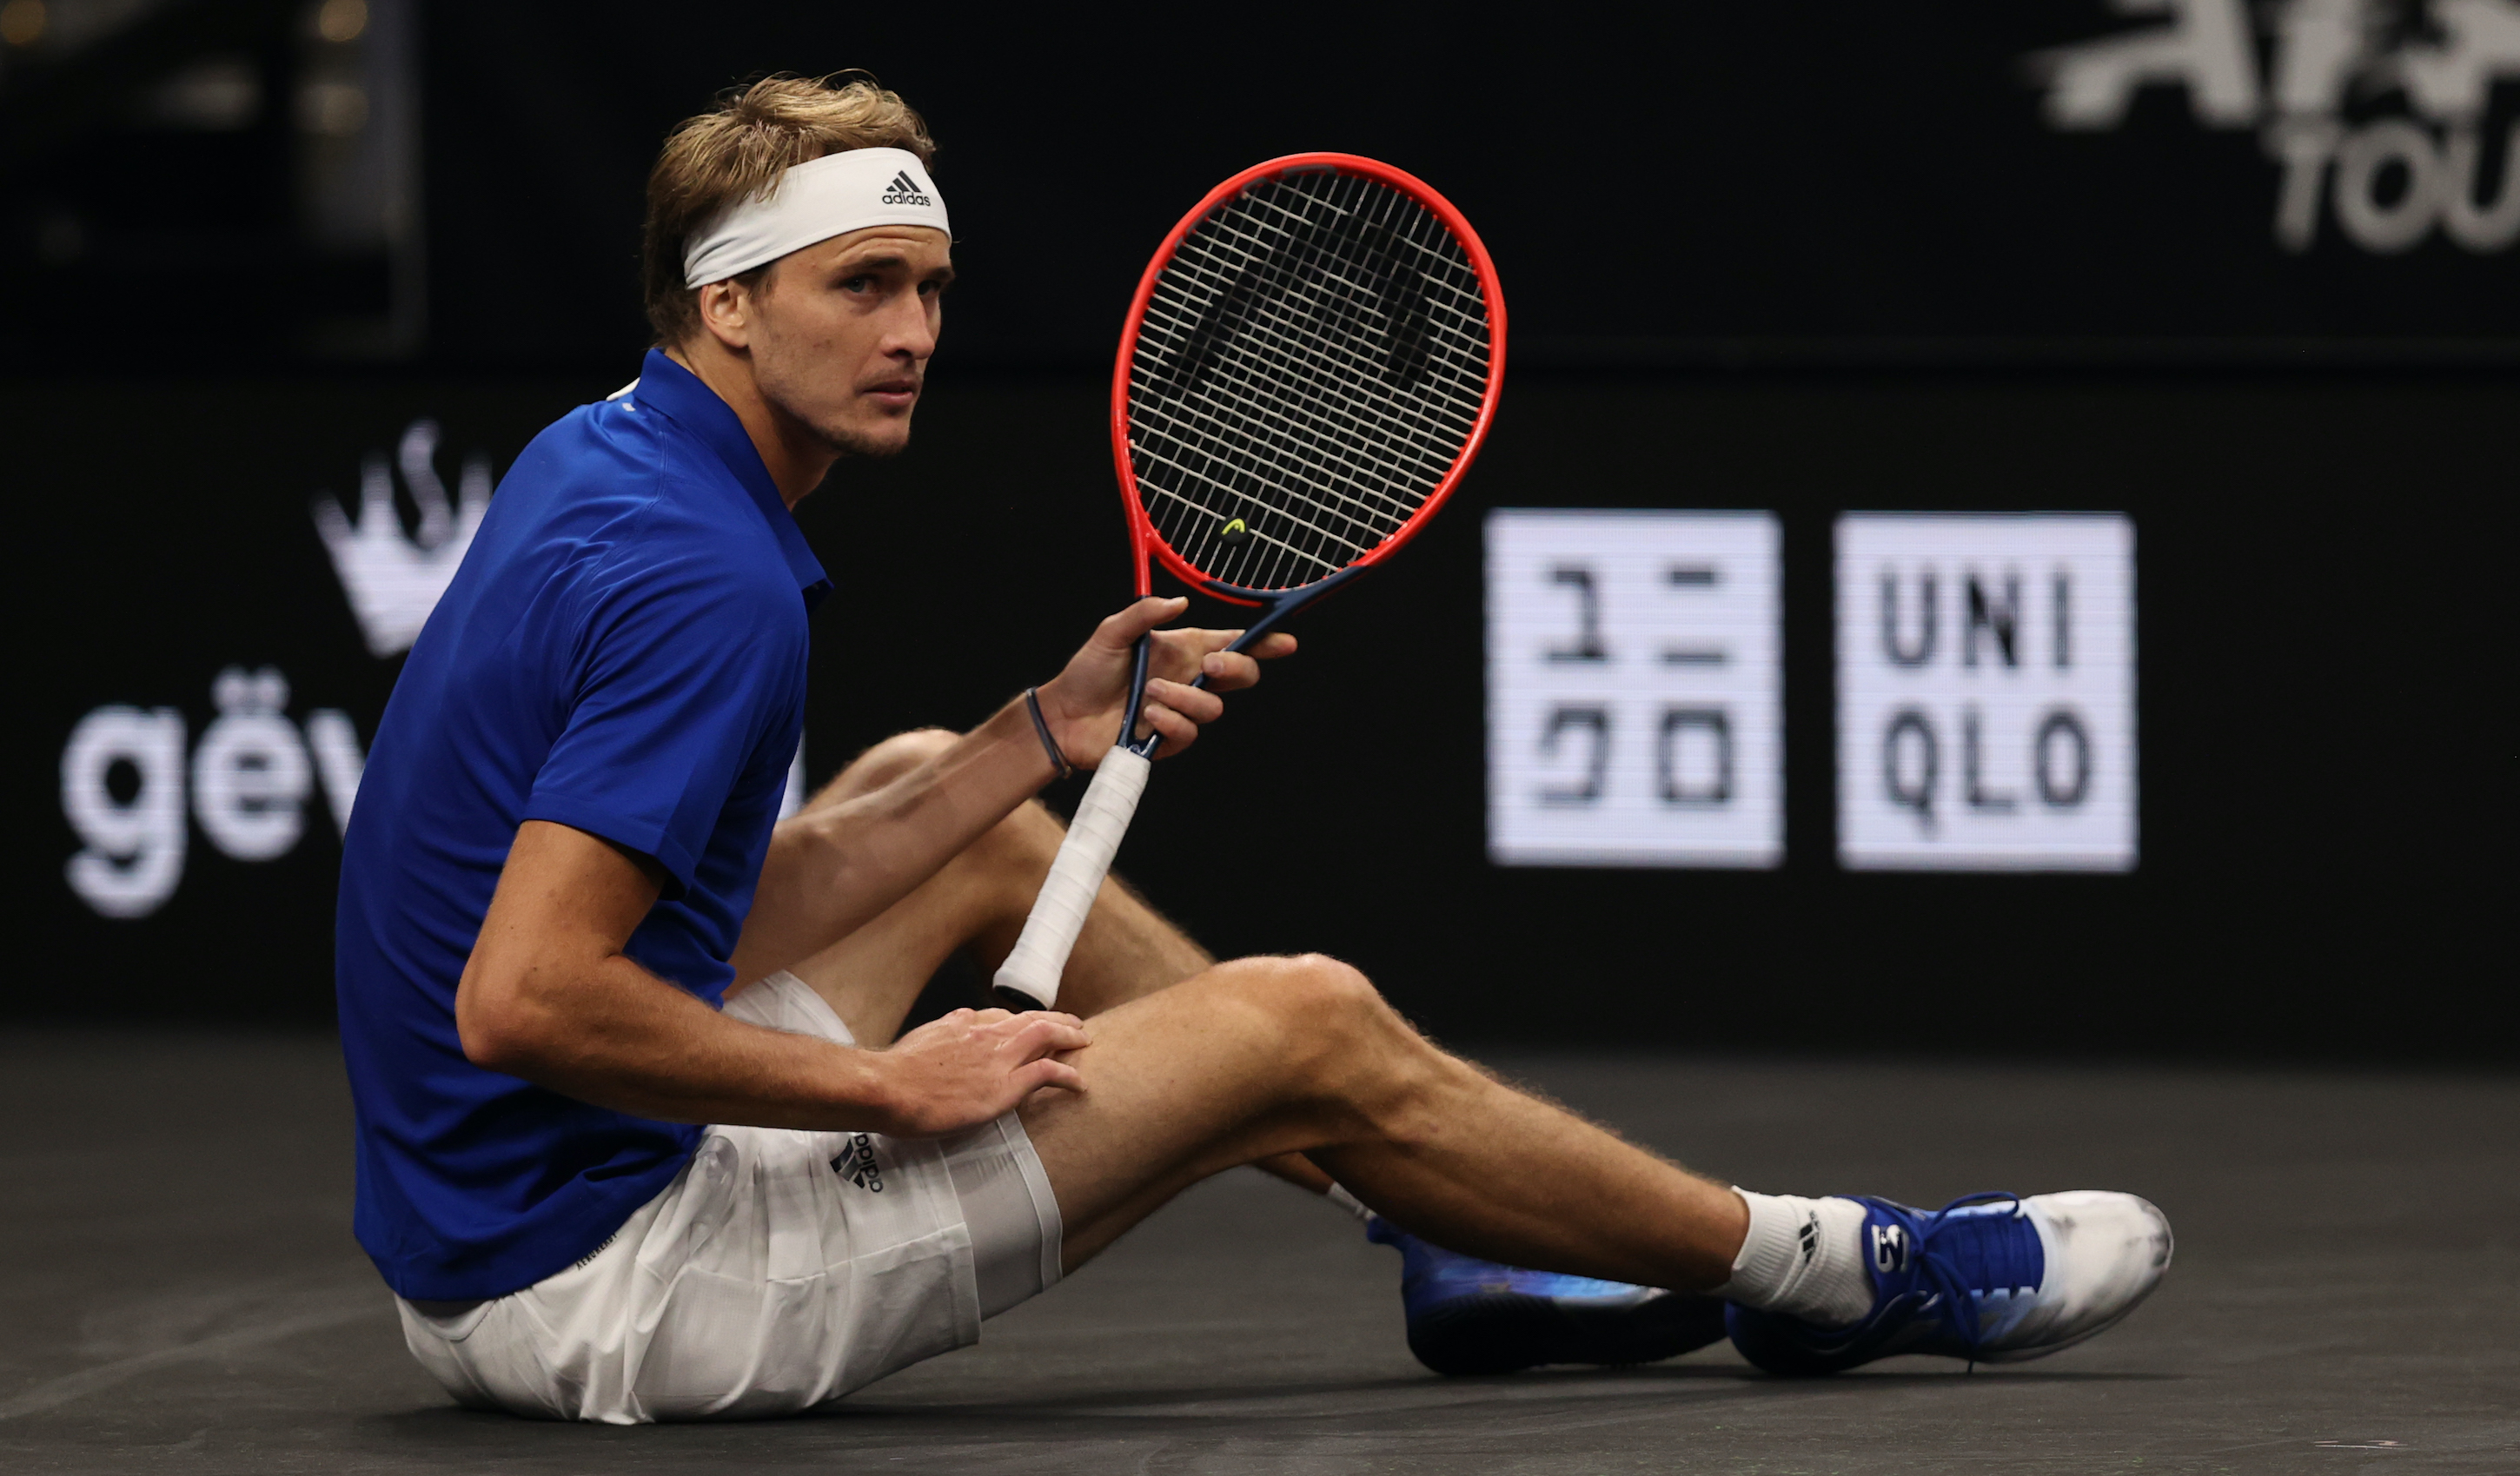 Alexander Zverev of Team Europe reacts to a shot against John Isner of Team World during the sixth match during Day 2 of the 2021 Laver Cup at TD Garden on September 25, 2021 in Boston, Massachusetts.